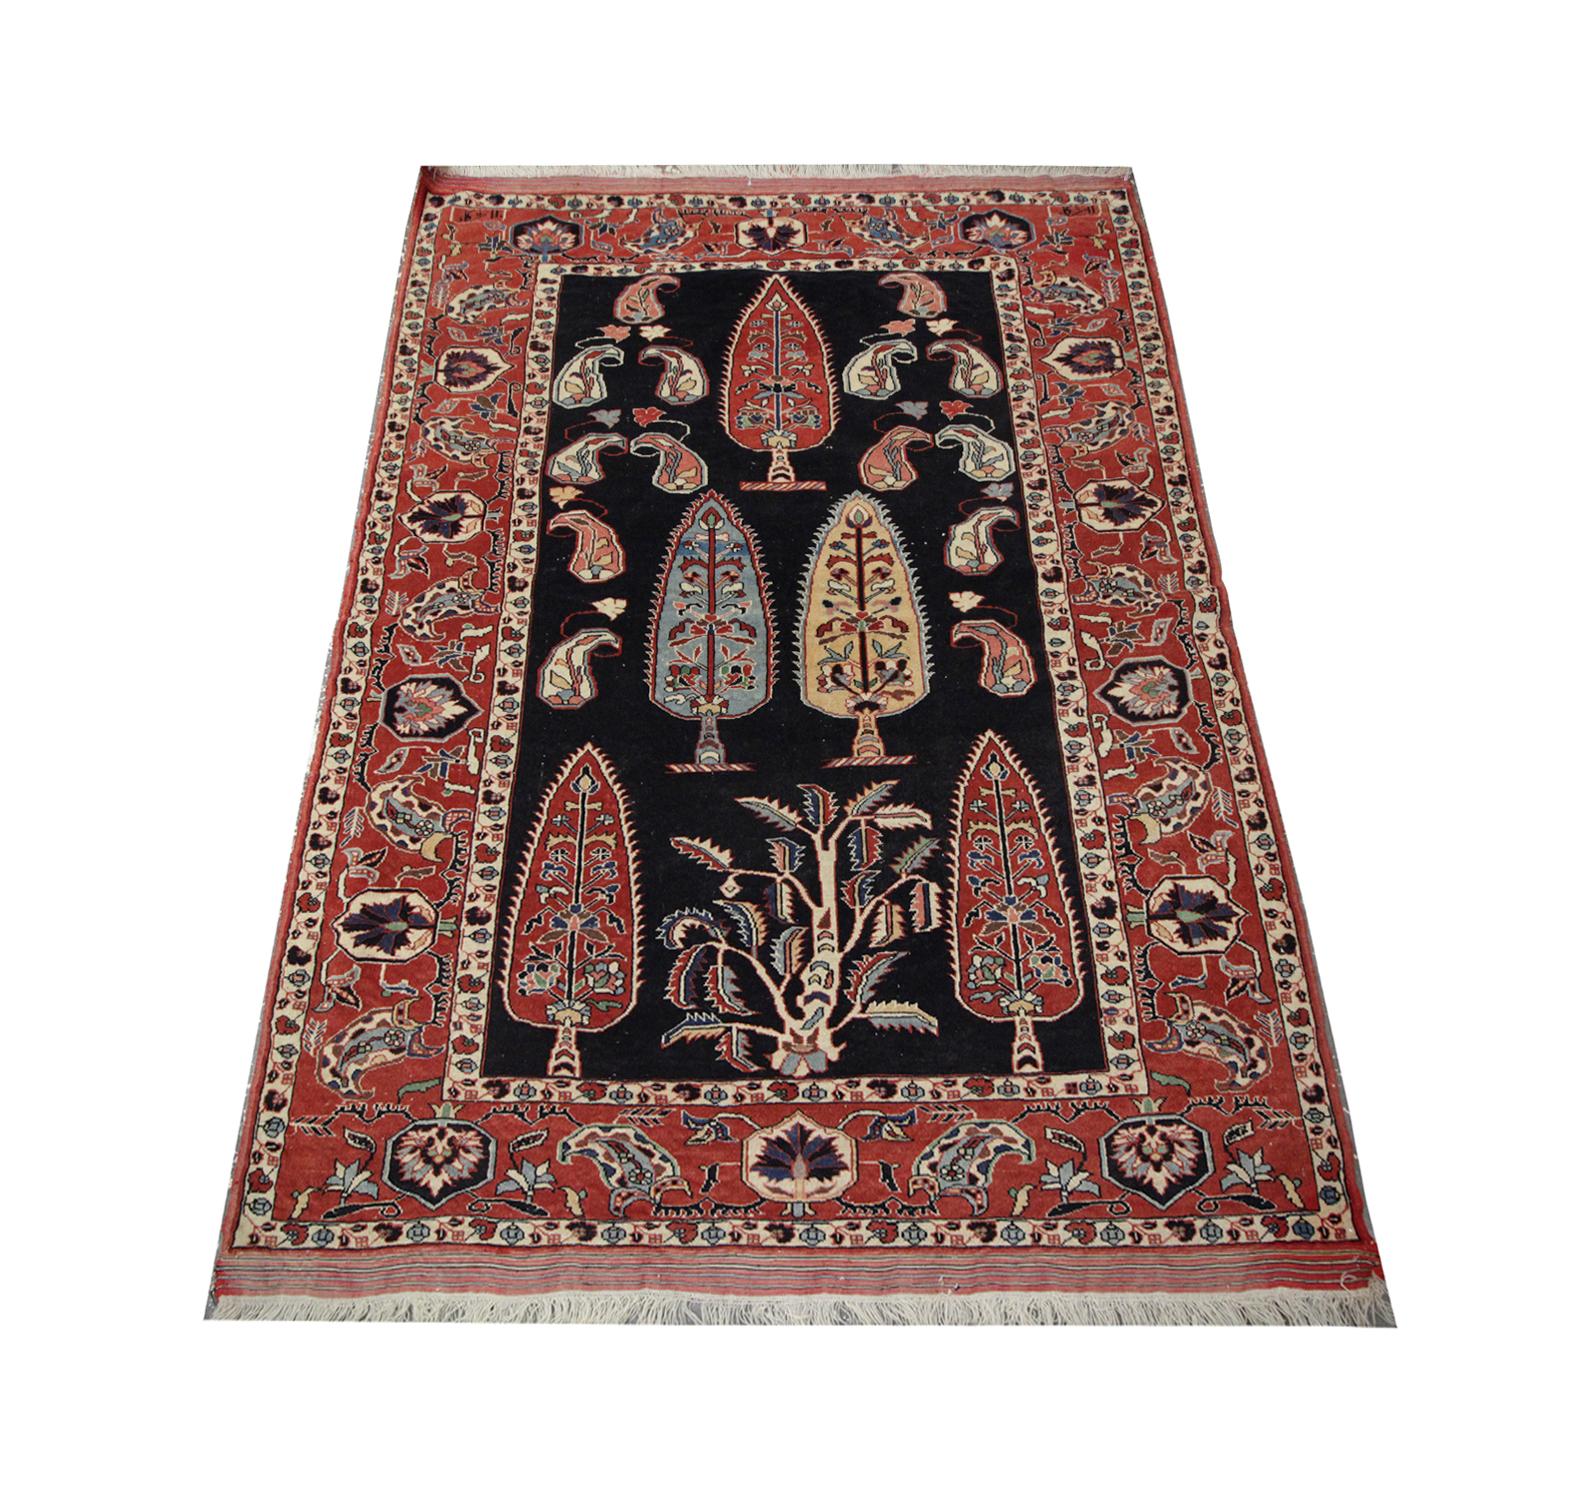 Handmade carpet with stunning Reds drench this vintage Caucasian, Azerbaijan area rug, featuring an abstract central design with yellow blue and red tree-like emblems with intricate details and surrounding tear-shaped motifs woven with floral